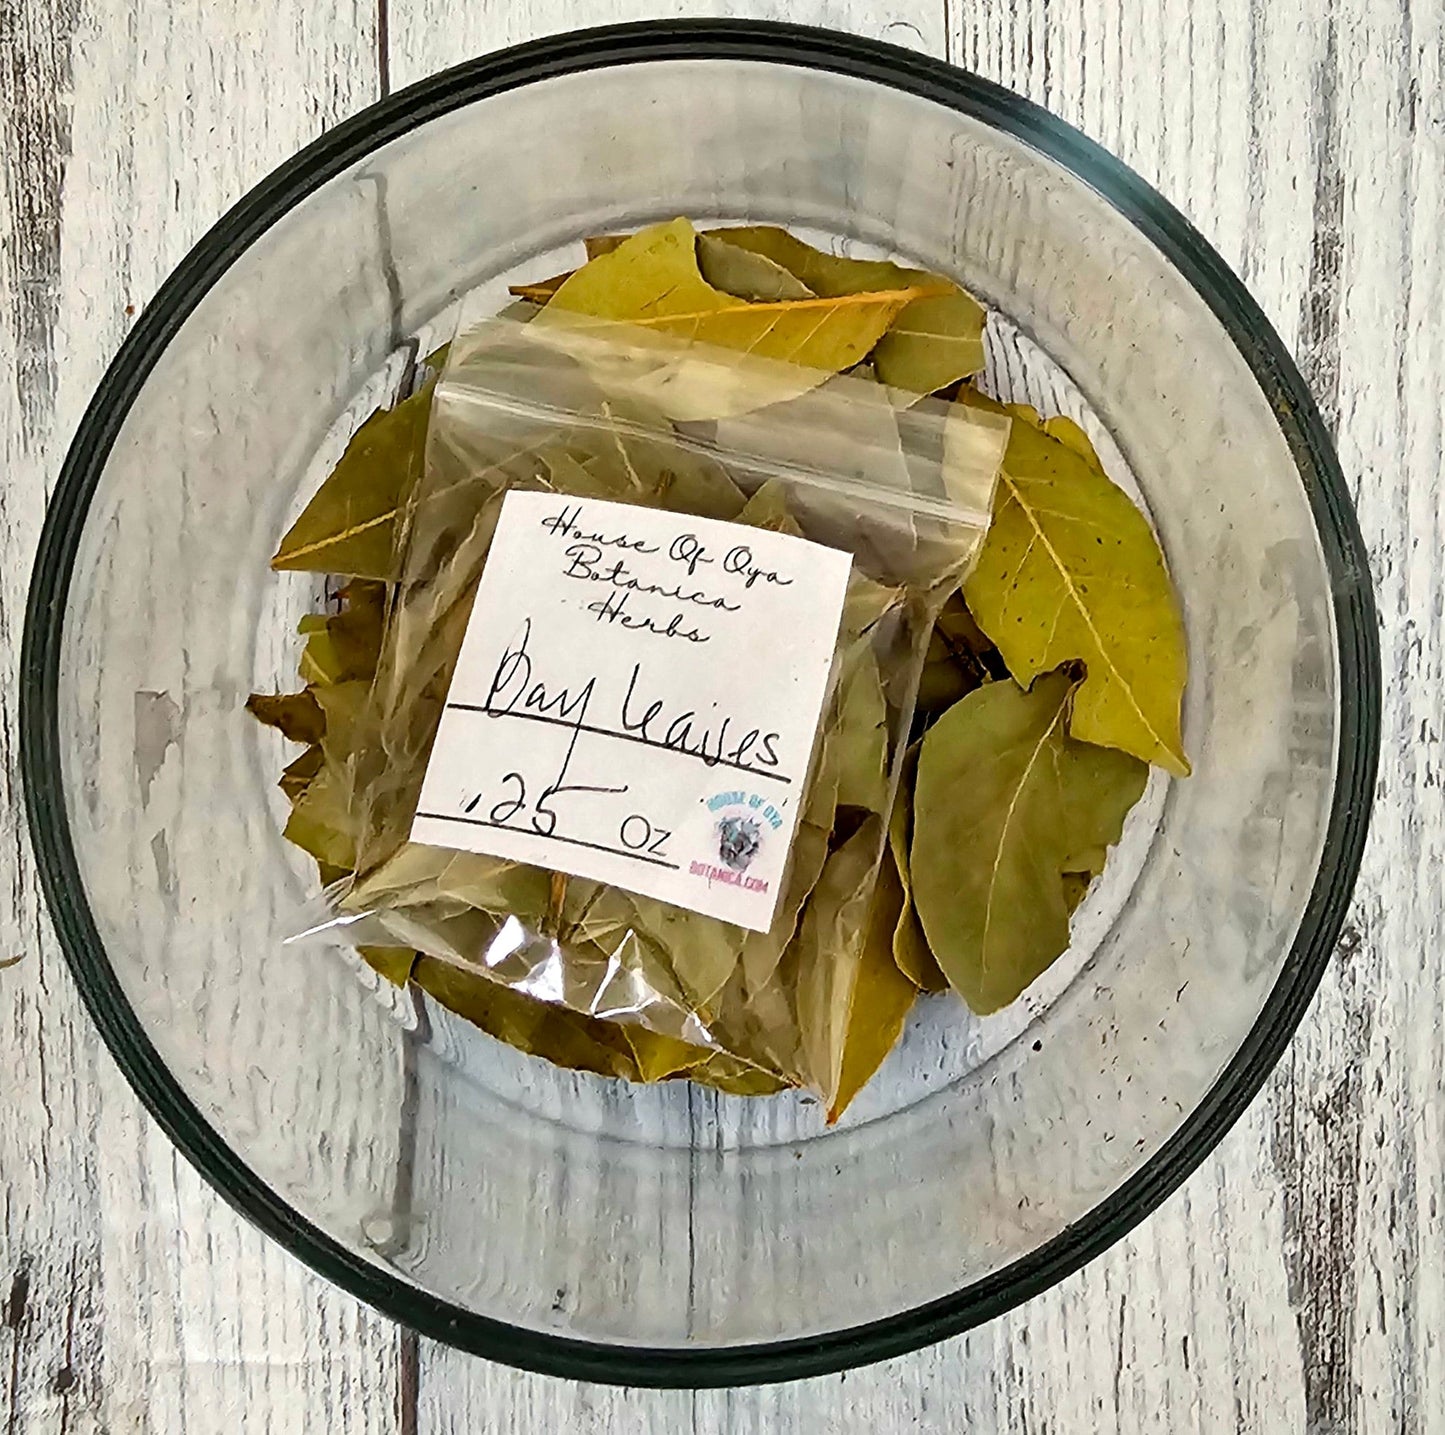 Witch Herbs, Bay Leaves